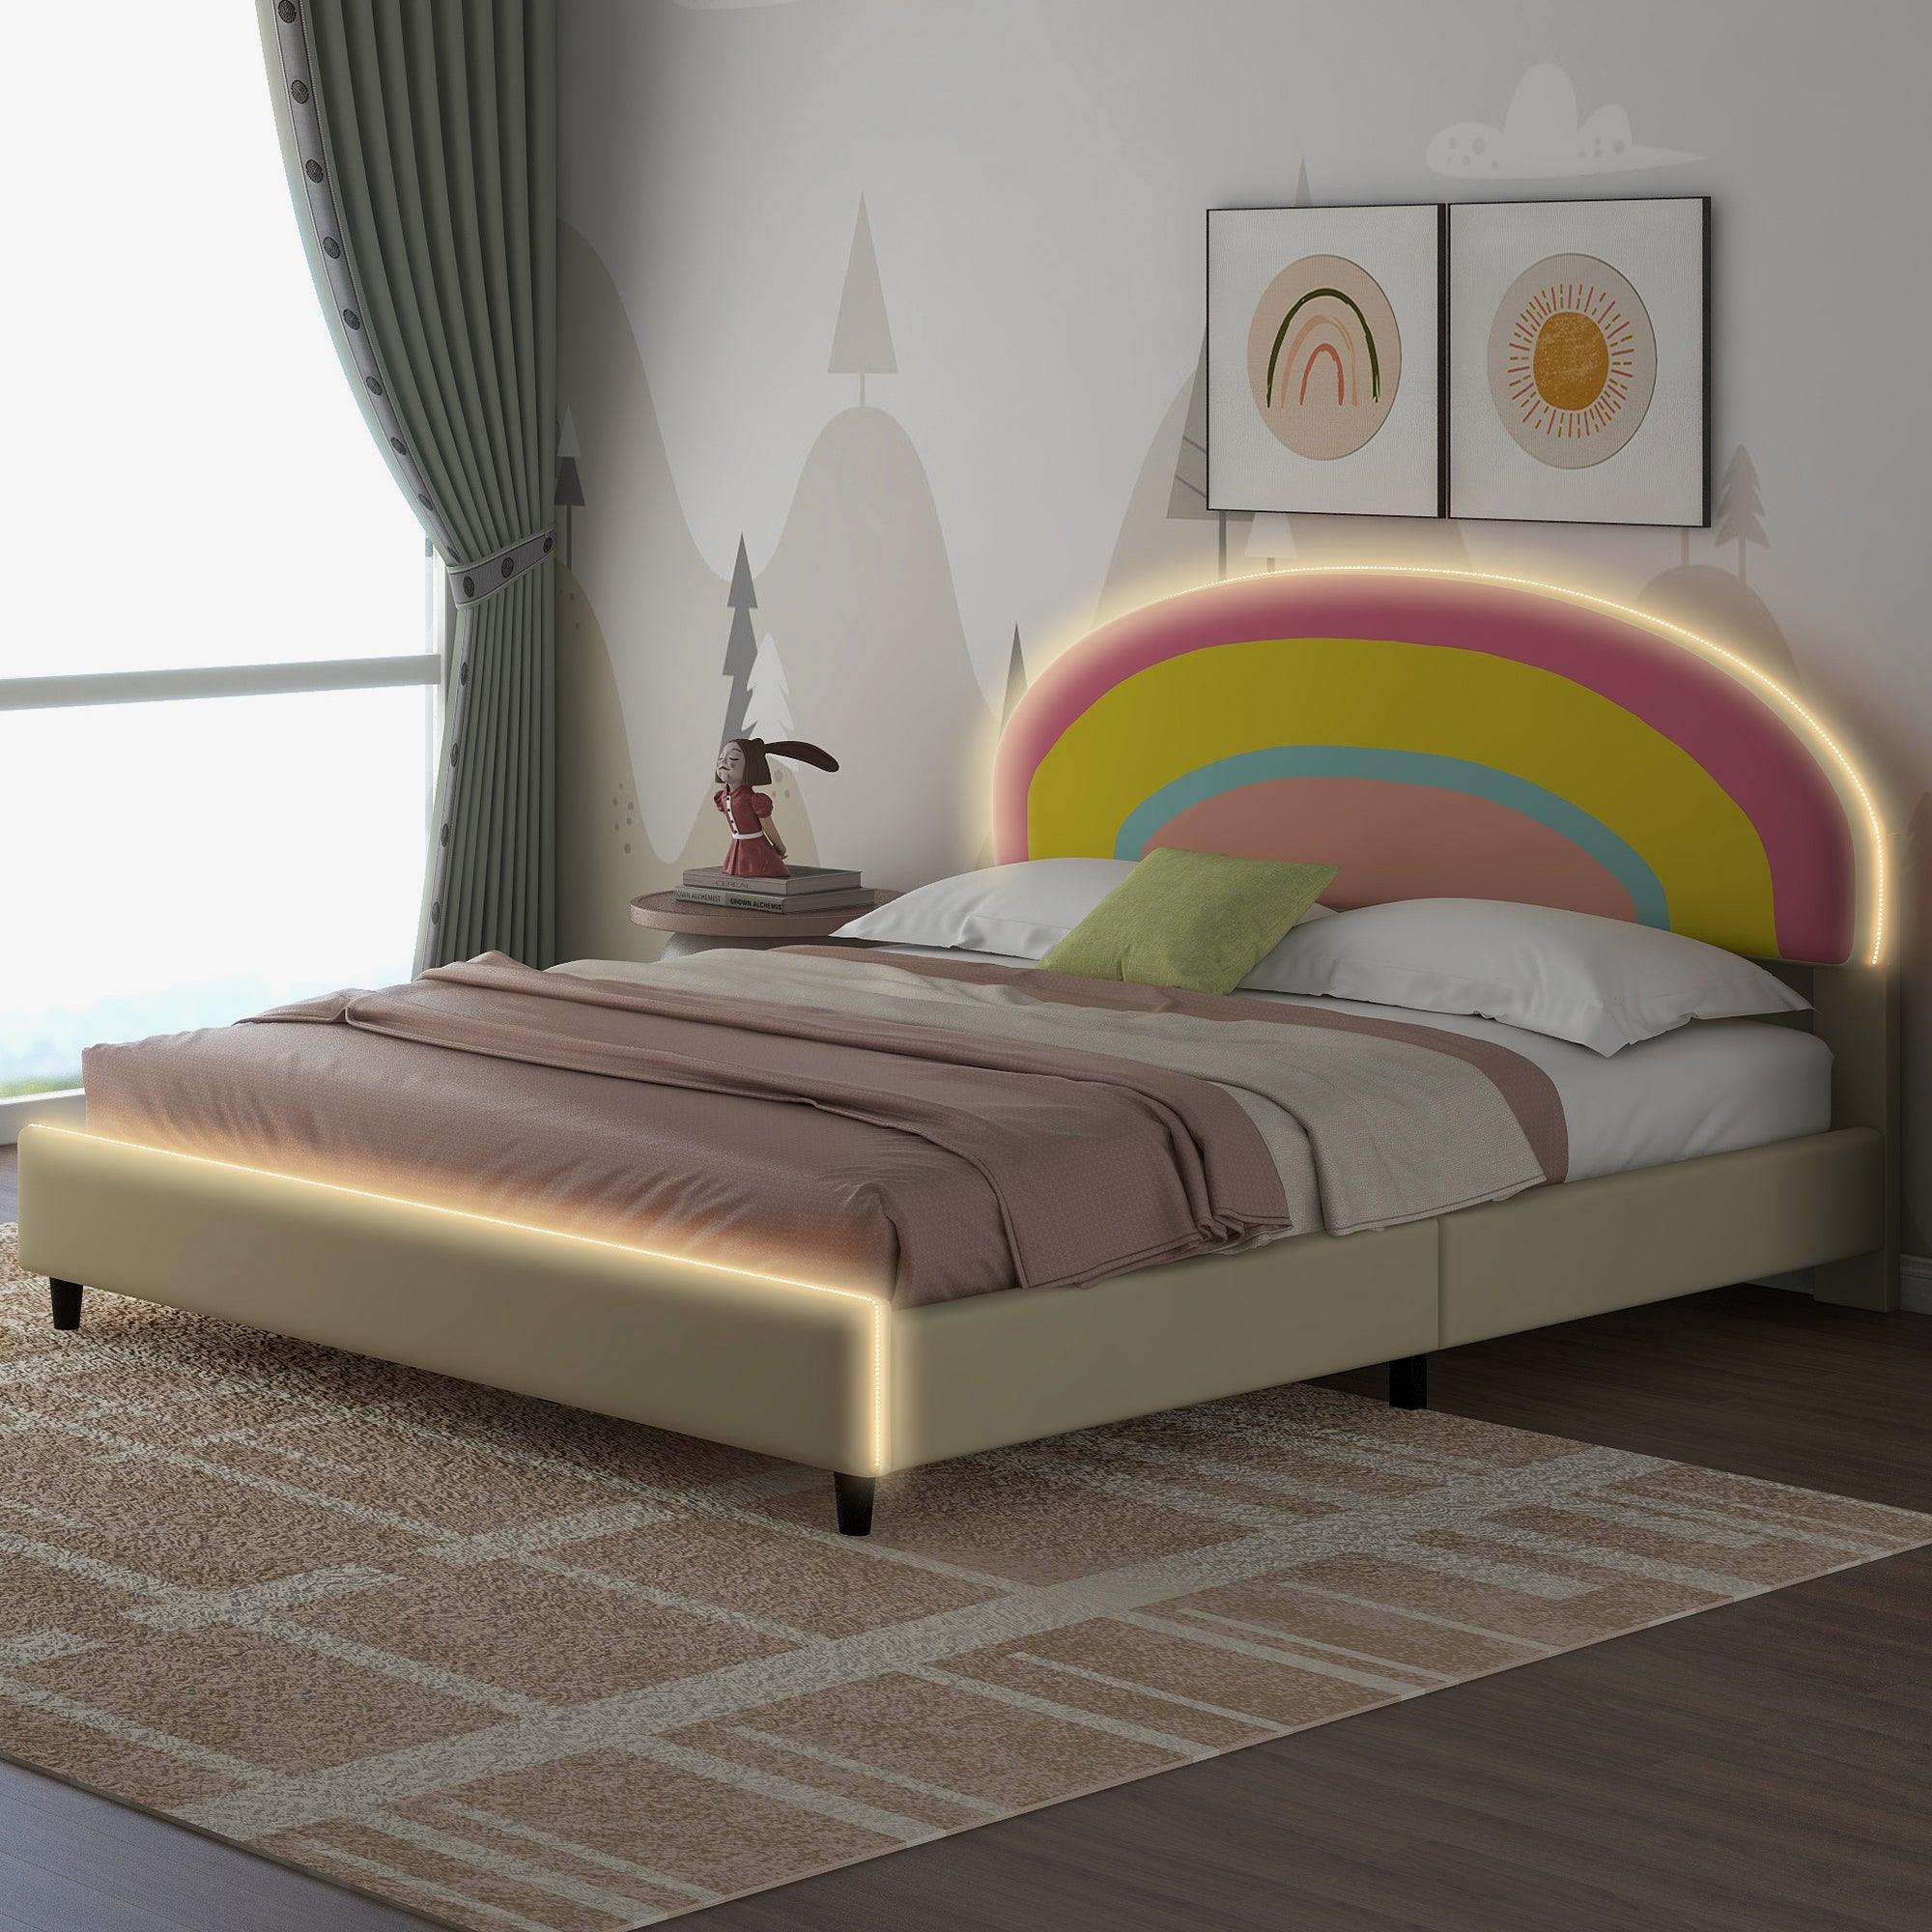 🆓🚛 Full Size Upholstered Platform Bed With Rainbow Shaped and Height-Adjustbale Headboard, Led Light Strips, Beige